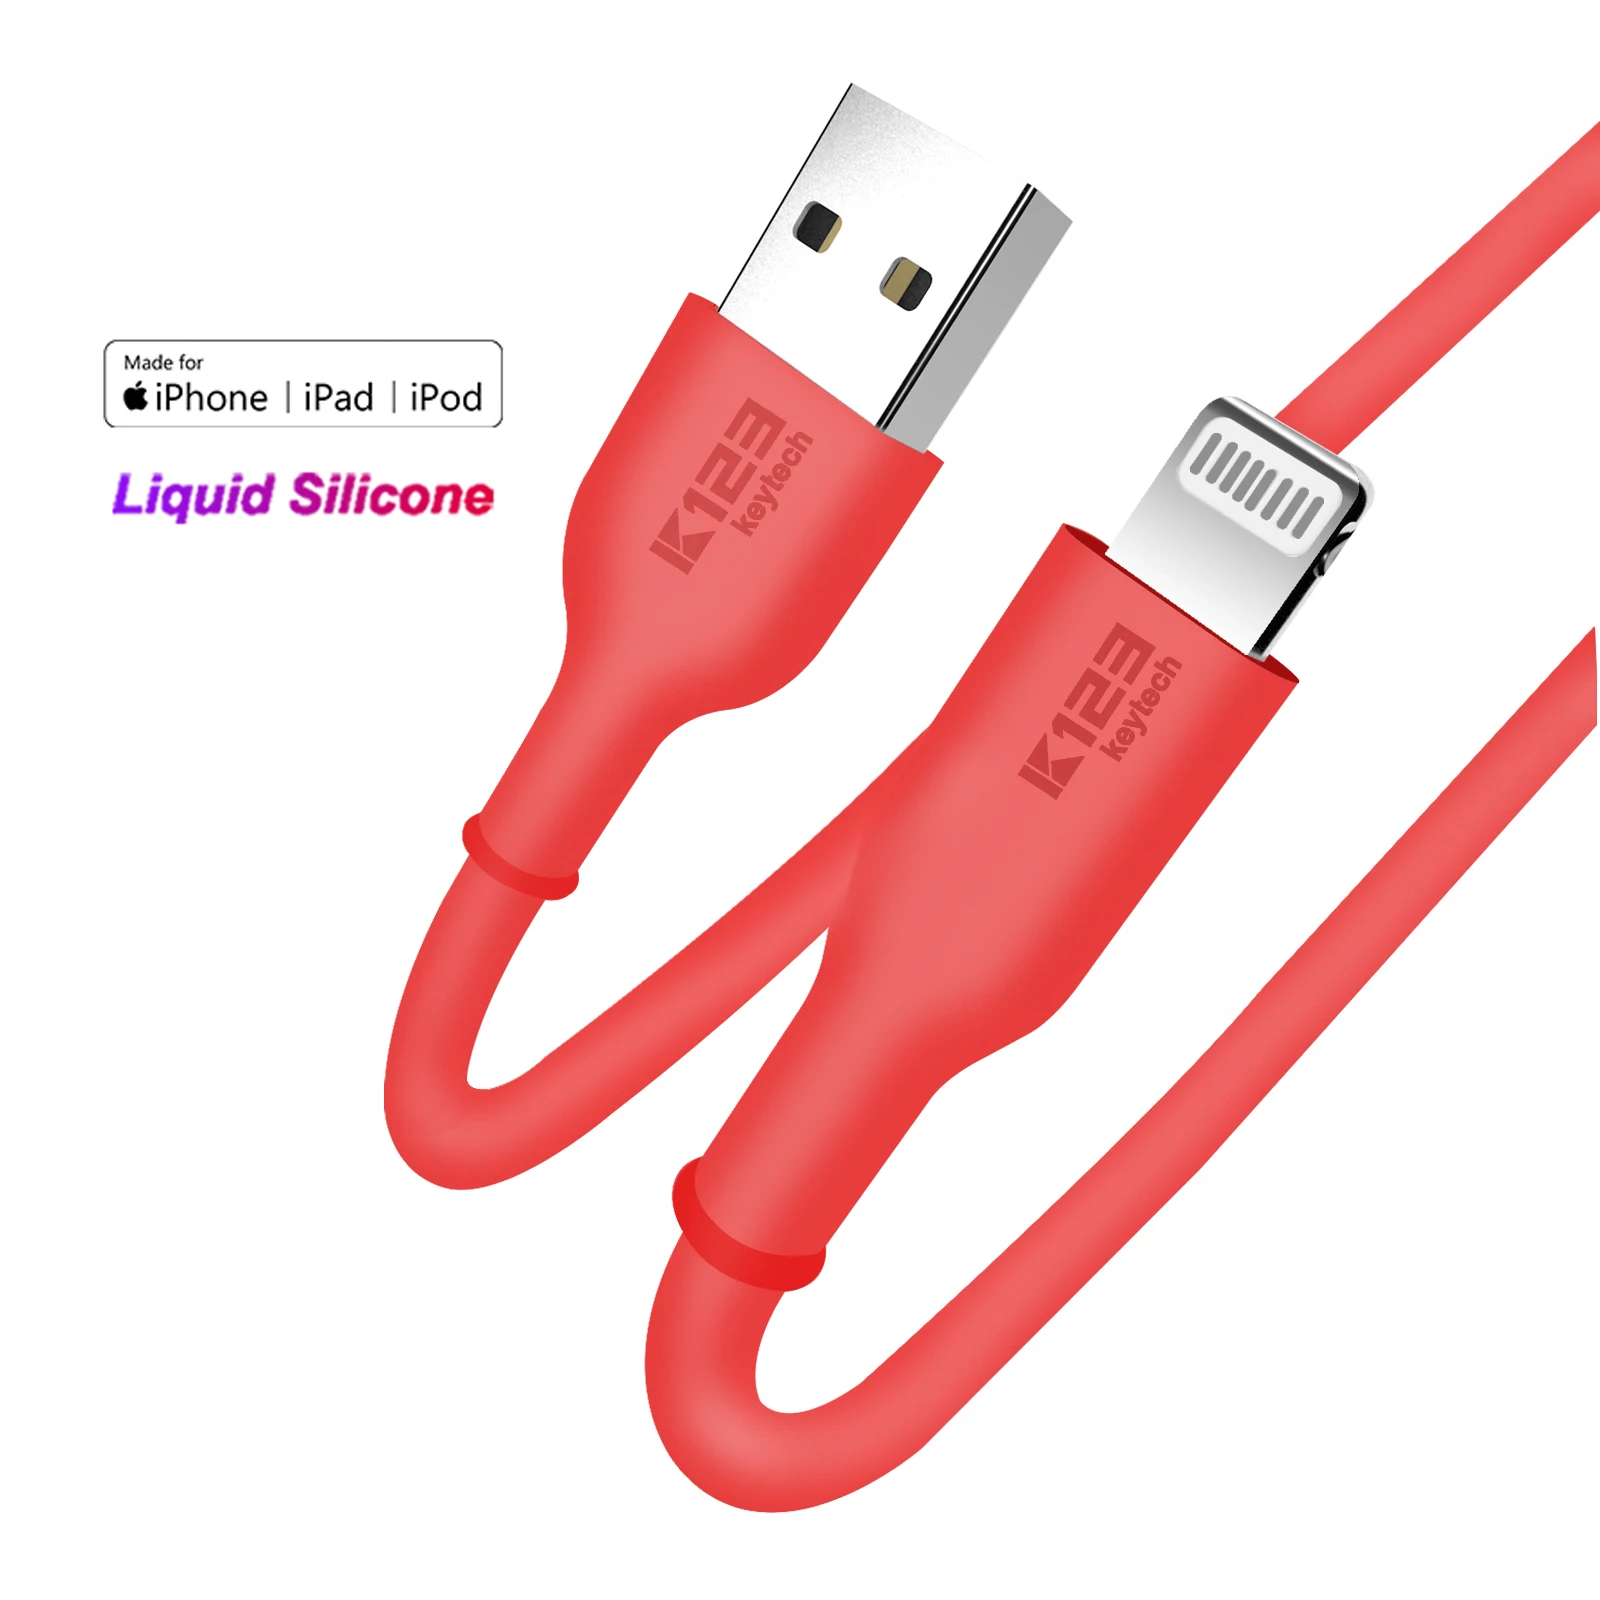 

K123 Amazon's Chioce Factory OEM ODM Silicone cable for iPhone 8 pin 100% Original USB Data Cable Mfi Certified, White